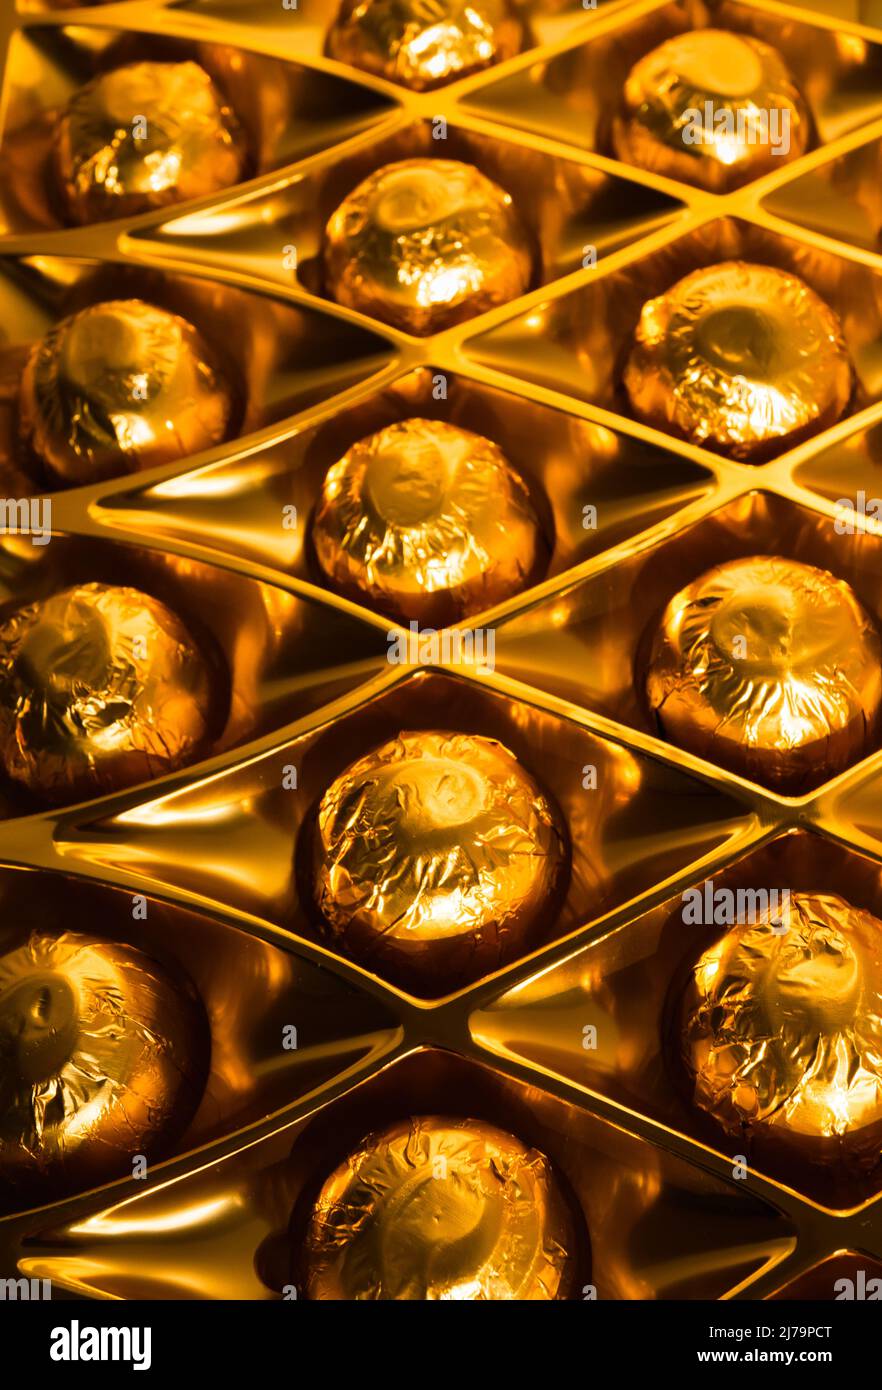 Box of gold foil wrapped chocolates Stock Photo